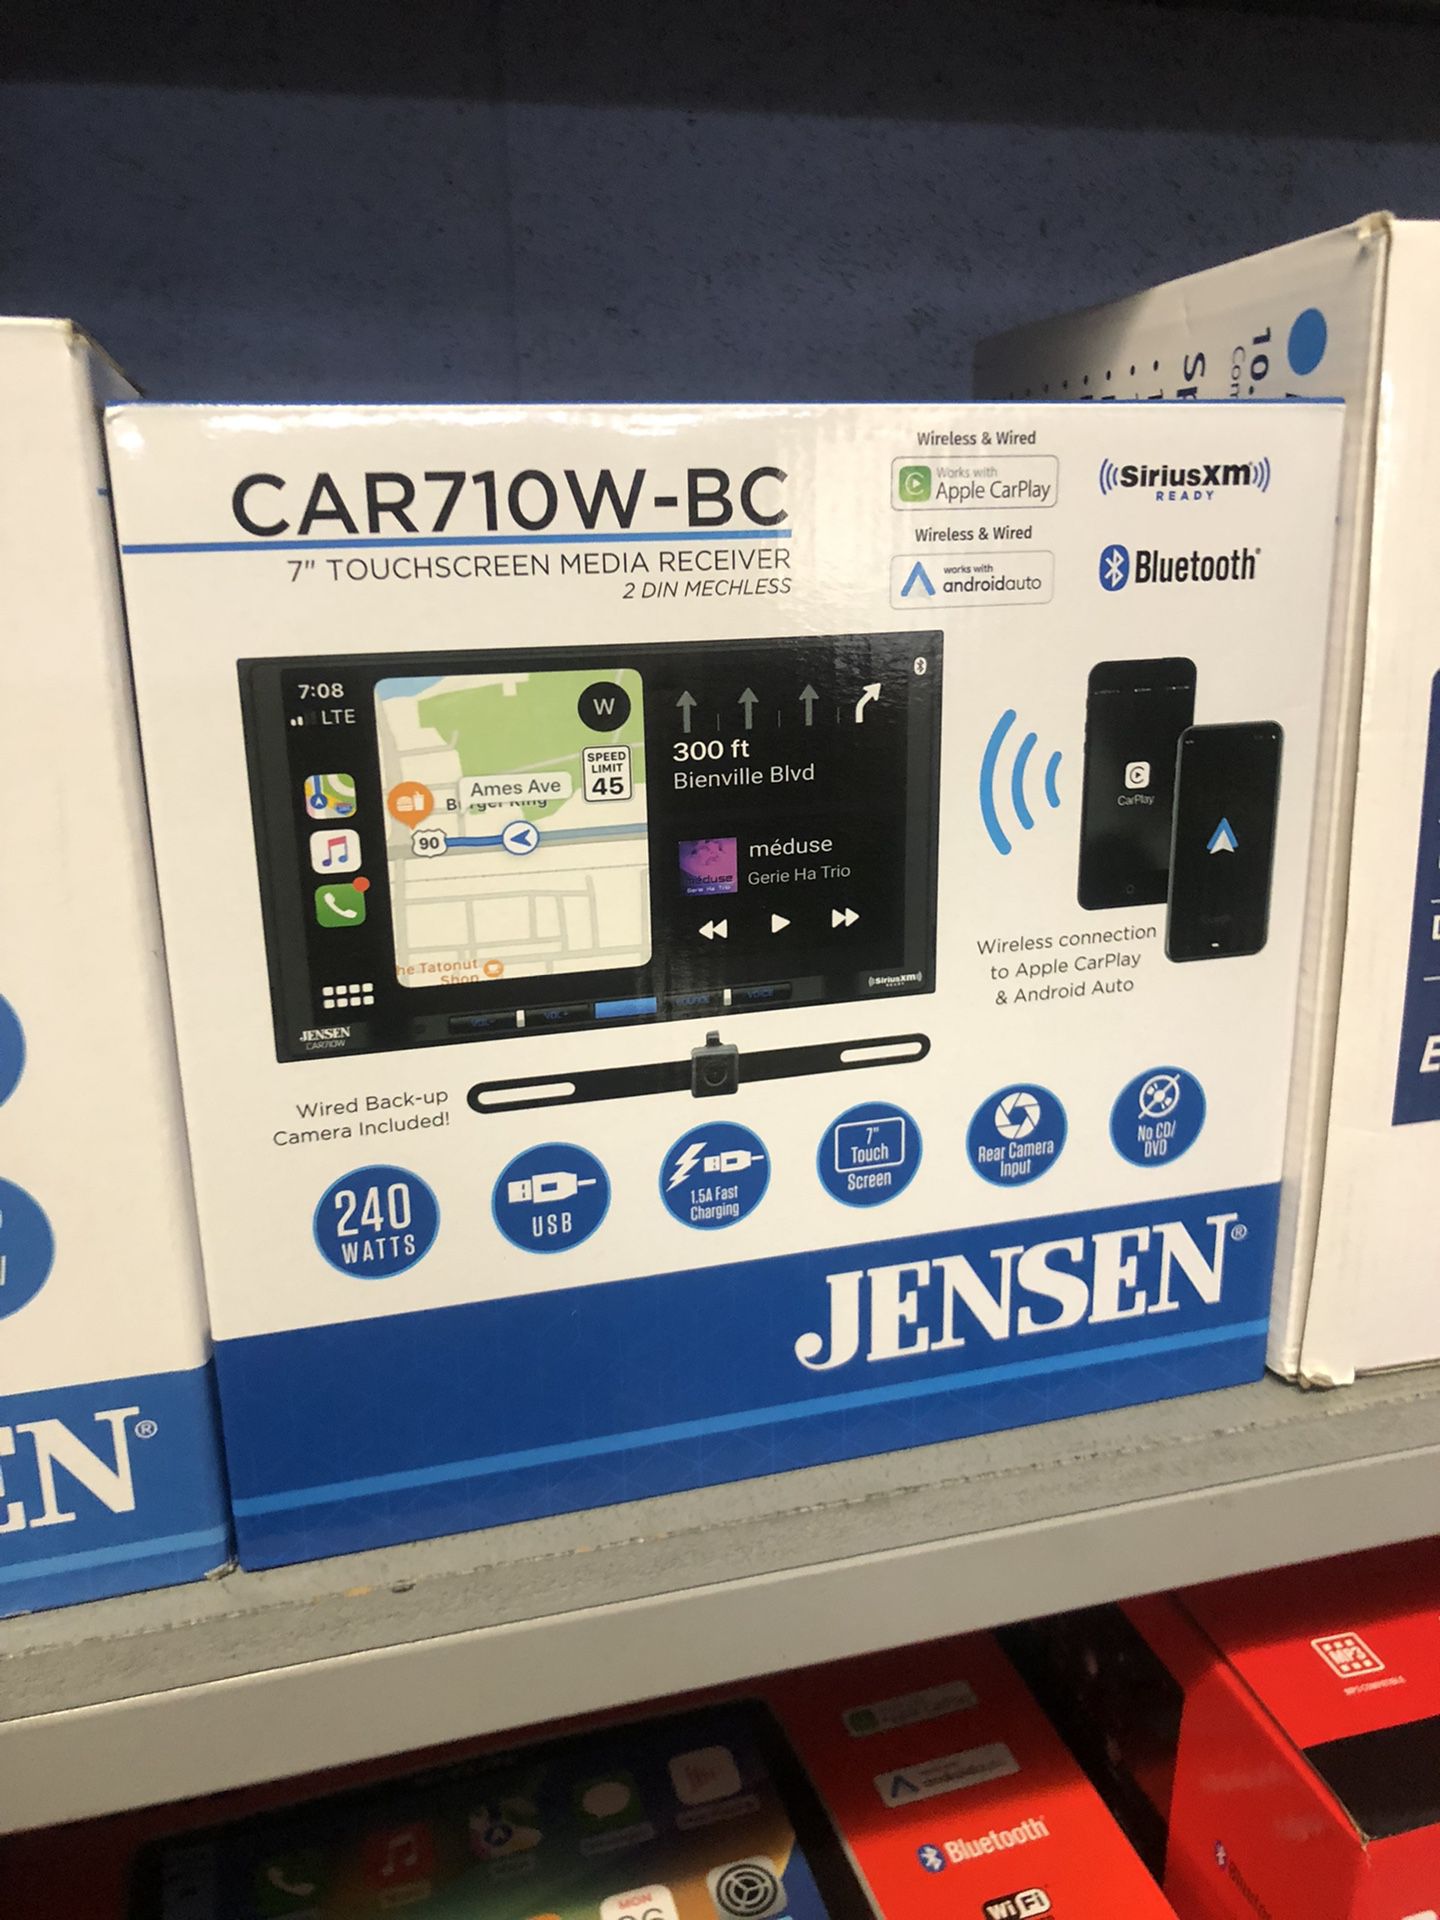 Jensen Car710w-bc On Sale Today For 259.99